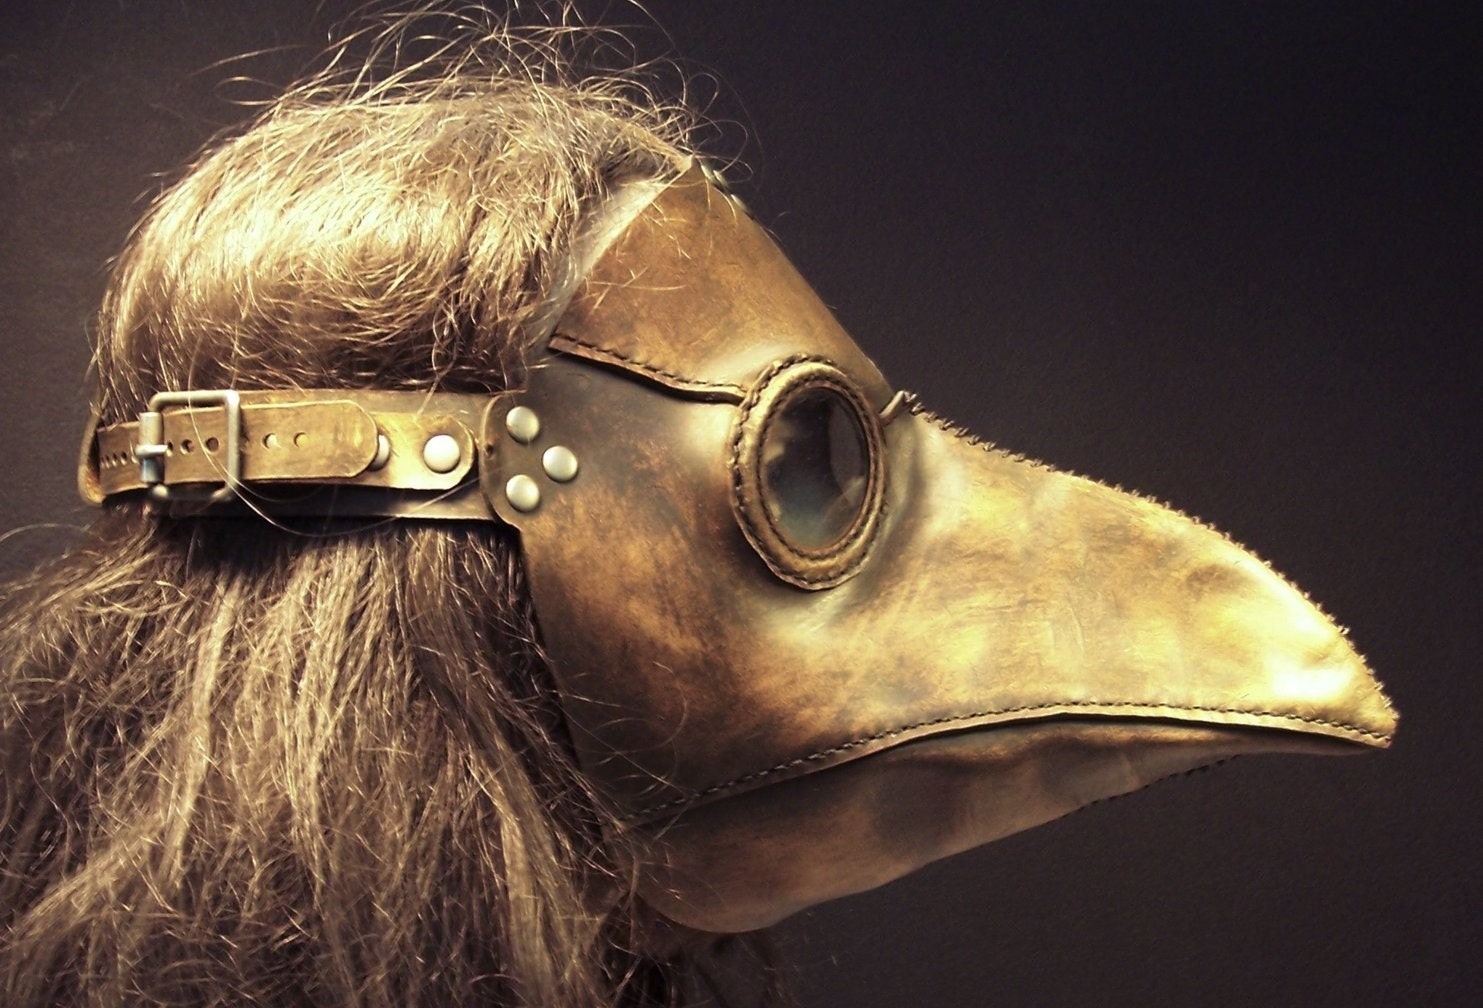 Plague Doctor's mask in leather. From TomBanwell